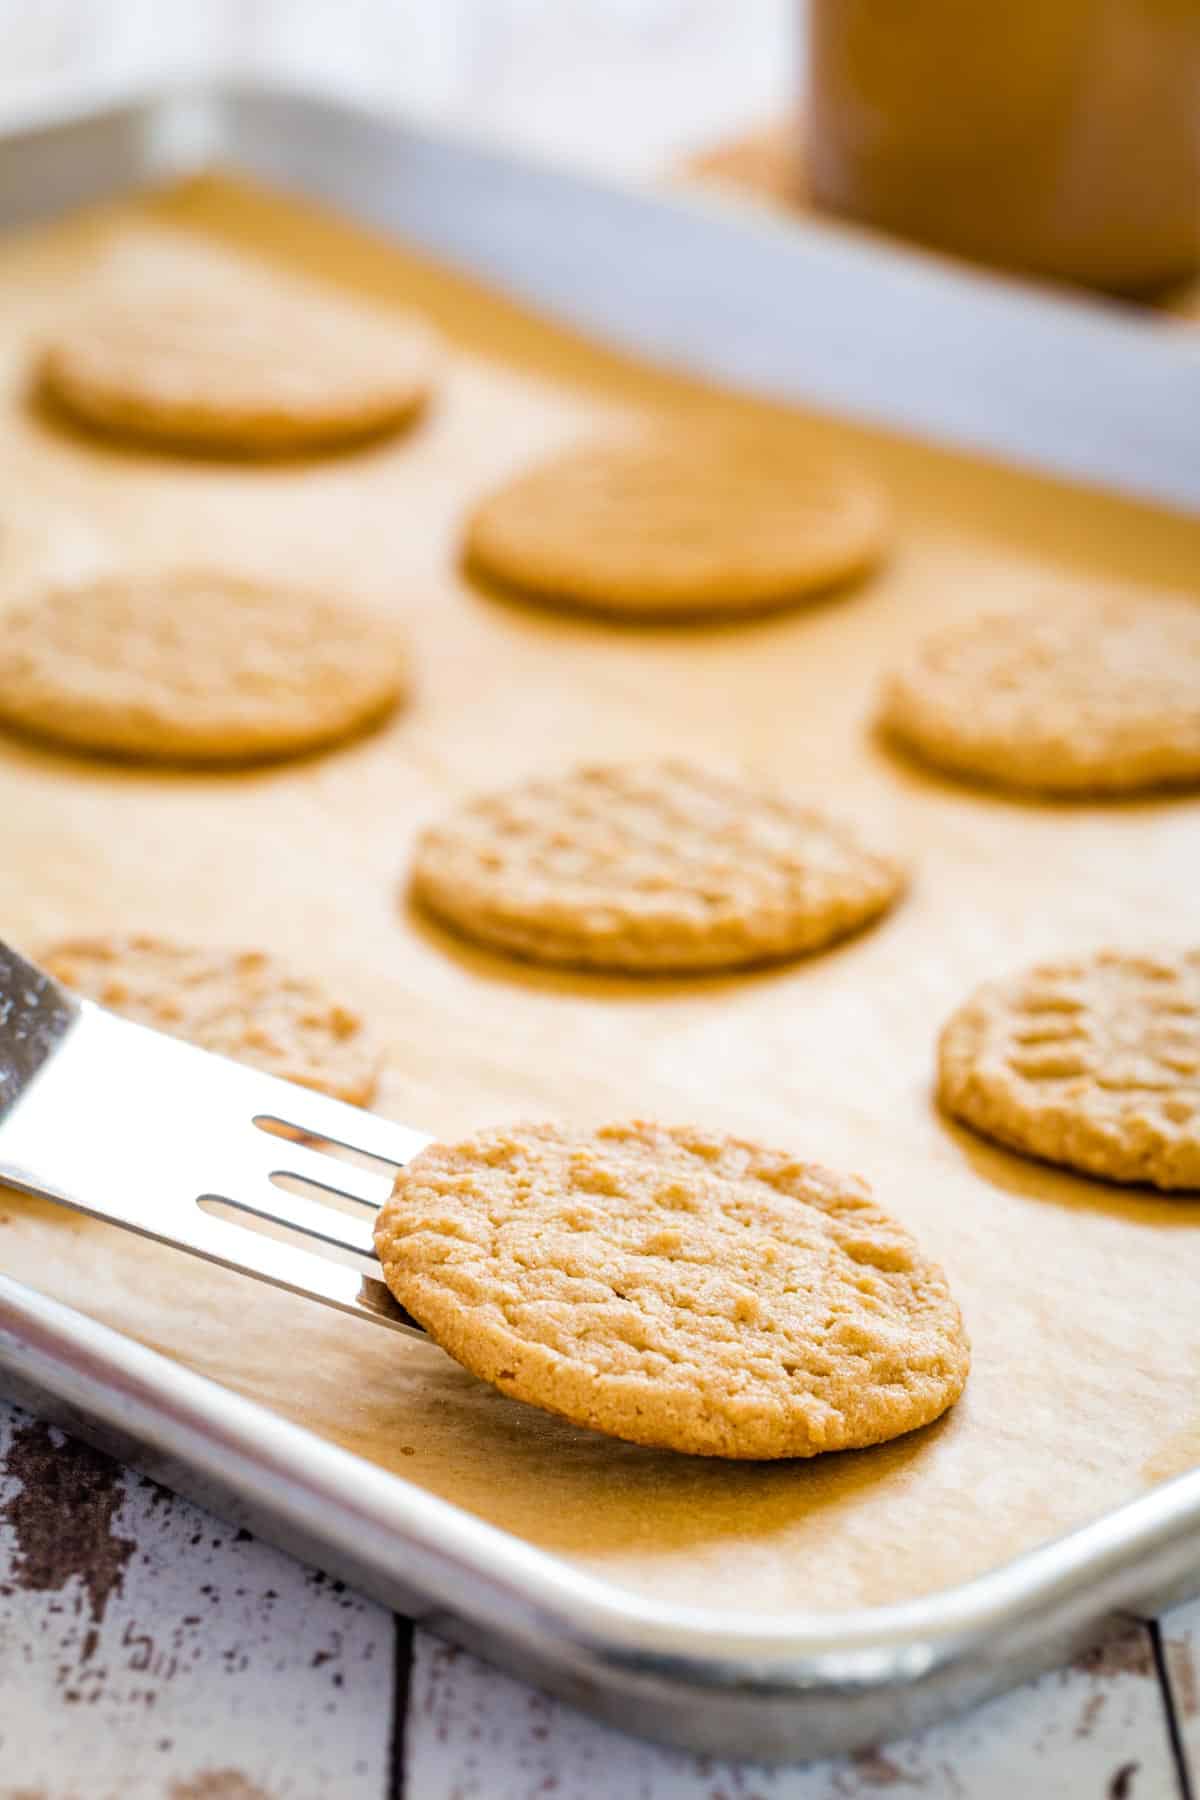 A spatula lifts a gluten-free peanut butter cookie from a lined baking tray of cookies.